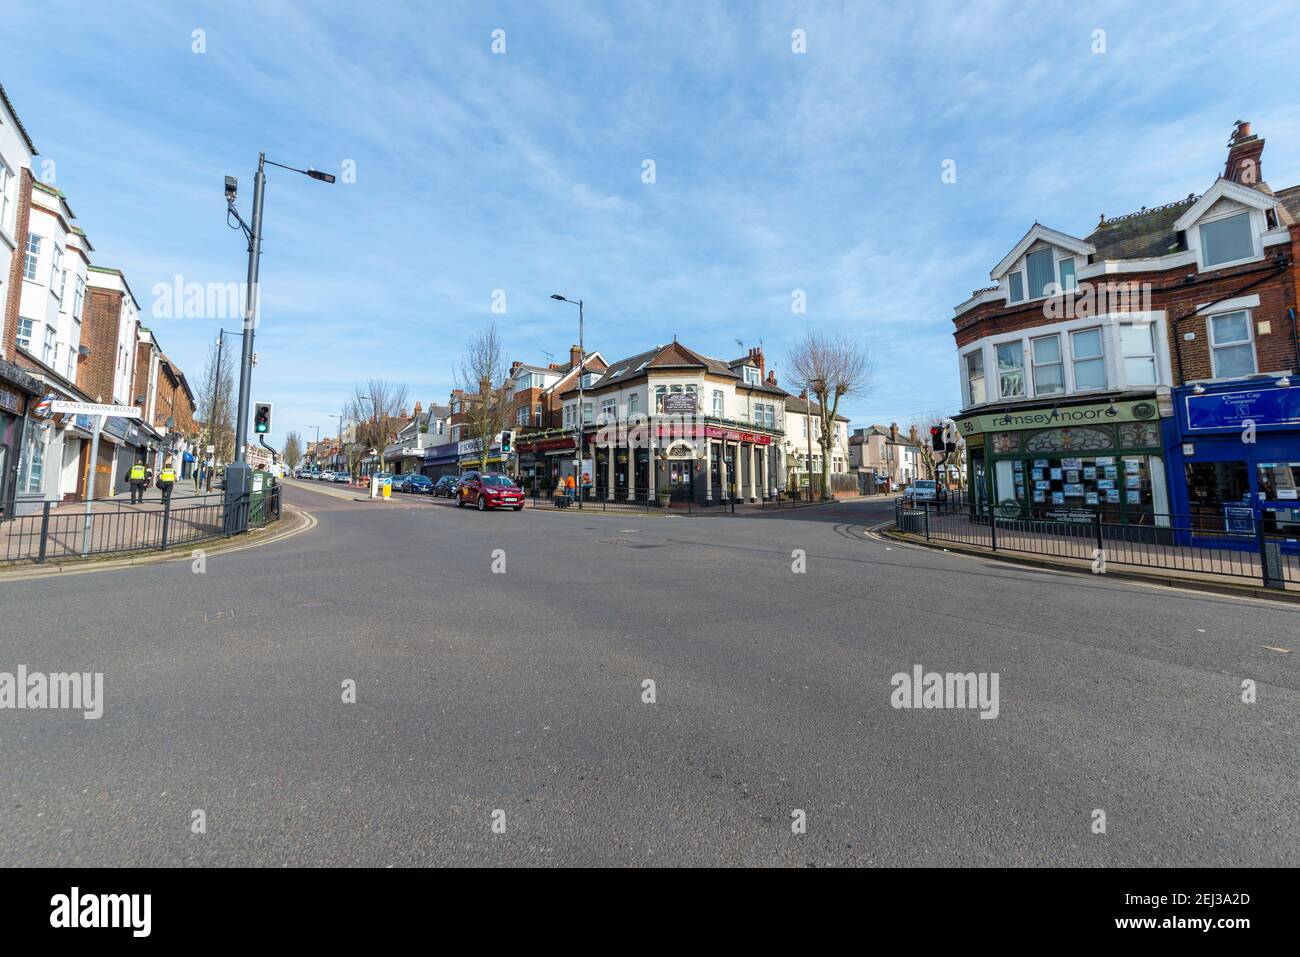 The Hamlet Court pub and crossroads in Hamlet Court Road, Westcliff on Sea, Essex, UK, during COVID 19 lockdown. Closed businesses Stock Photo